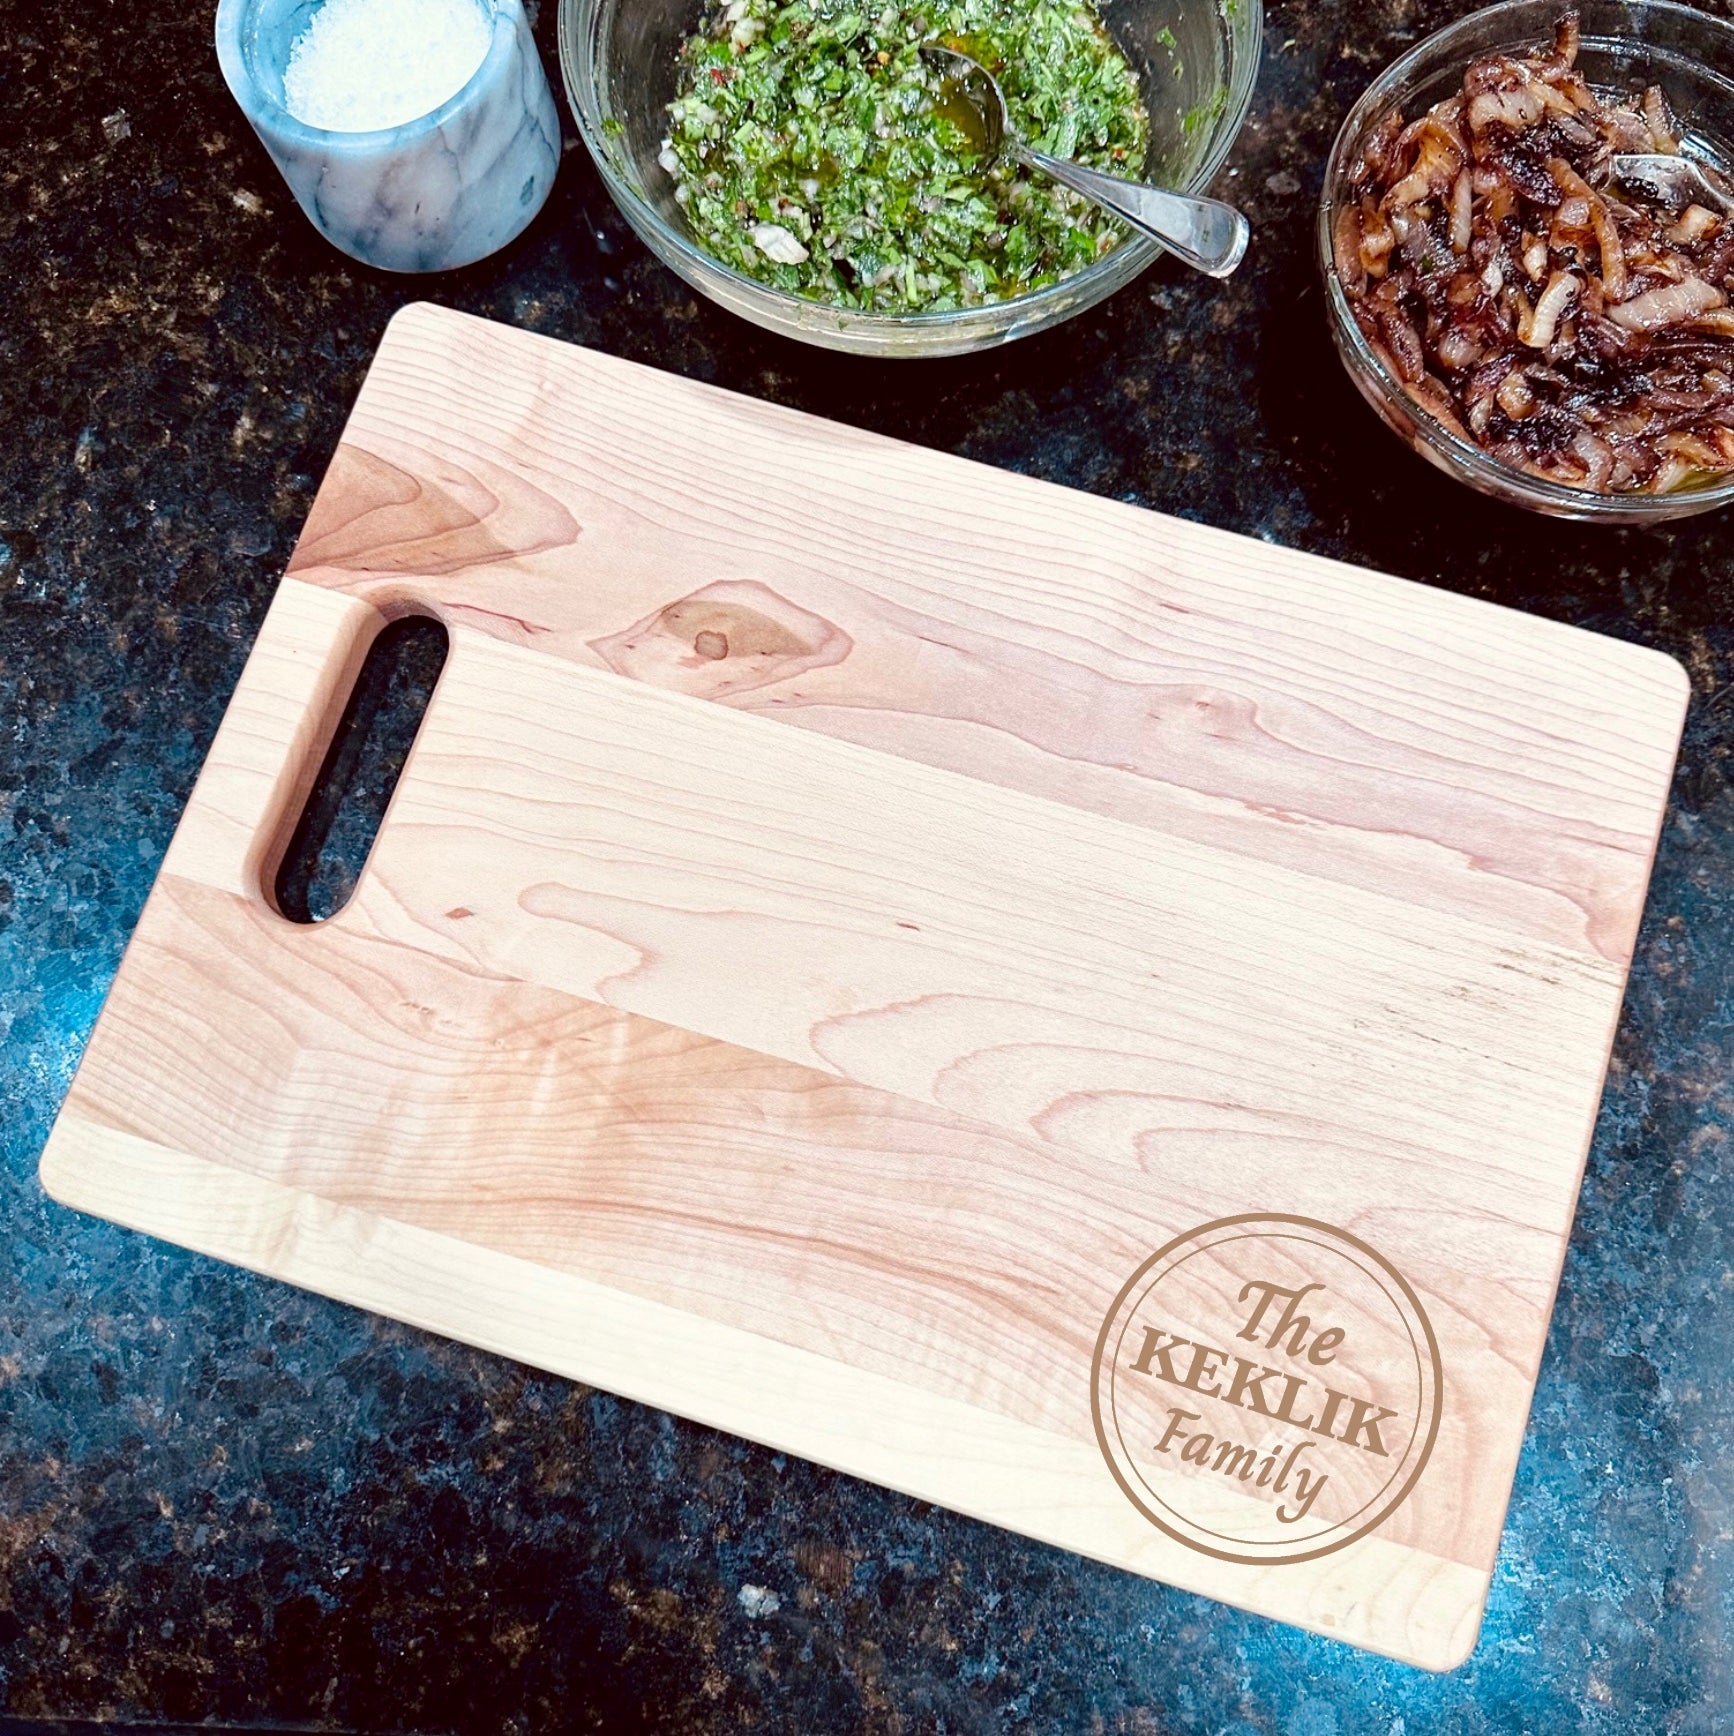 RECIPE CUTTING BOARD MOTHERS DAY GIFT GIFT FOR HER PERSONALIZED GIFT  KITCHEN DECOR